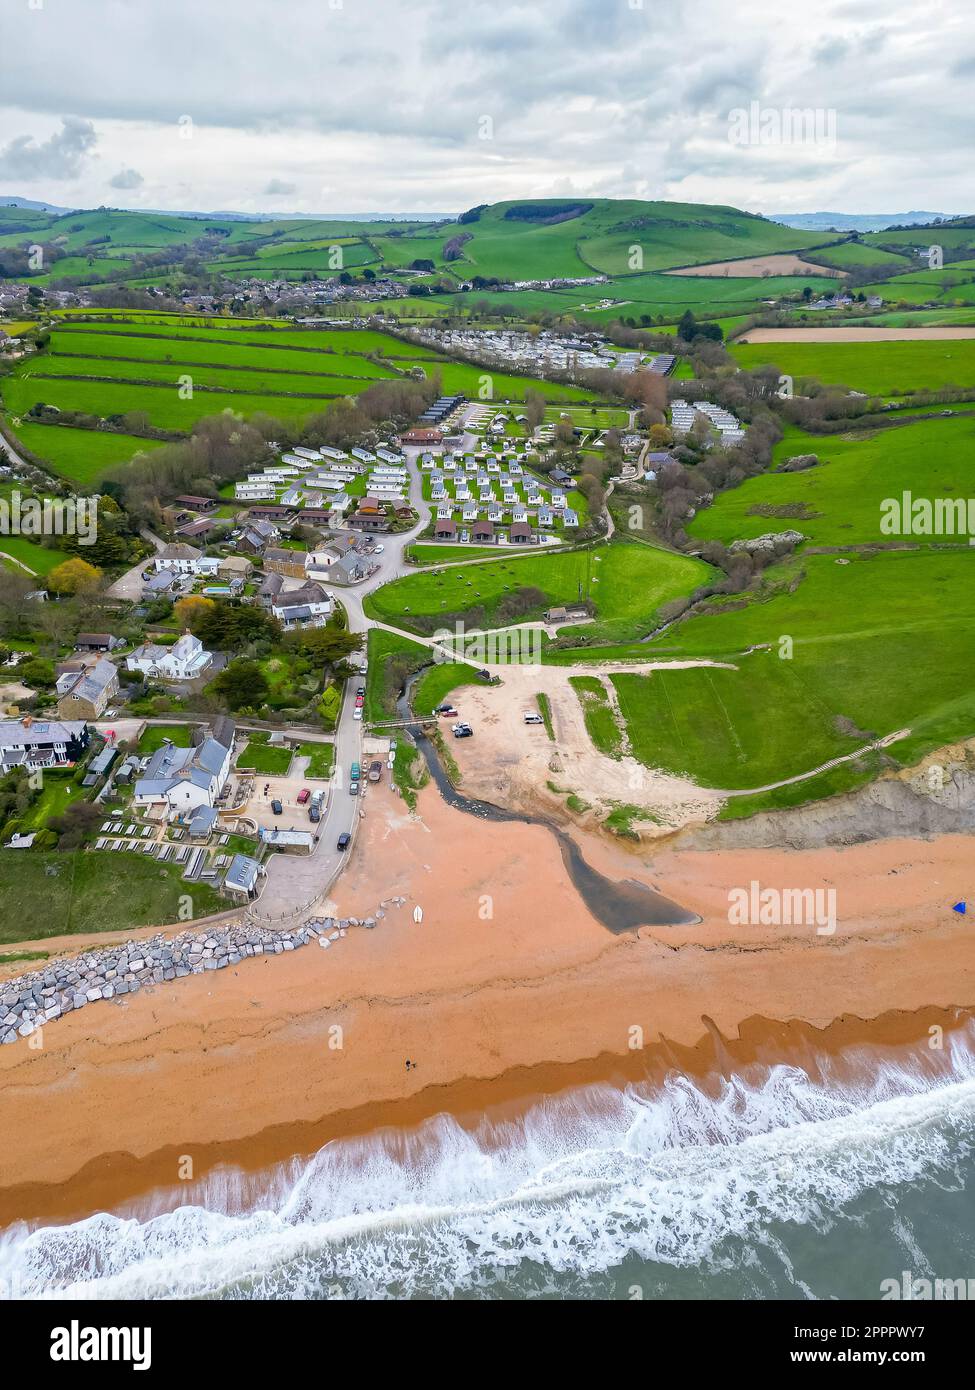 Seatown, Dorset, UK.  24th April 2023.  View from the air of the beach, River Winniford and village at Seatown on the Dorset Jurassic Coast.  In 2022, the sewer storm overflow 500 meters inland next to the River Winniford at the Chideock sewage treatment works owned by Wessex Water, (Permit number: 401068) spilled 35 times for a total of 363.50 hours, discharging into the River. (Source: https://theriverstrust.org/key-issues/sewage-in-rivers) Picture Credit: Graham Hunt/Alamy Live News Stock Photo